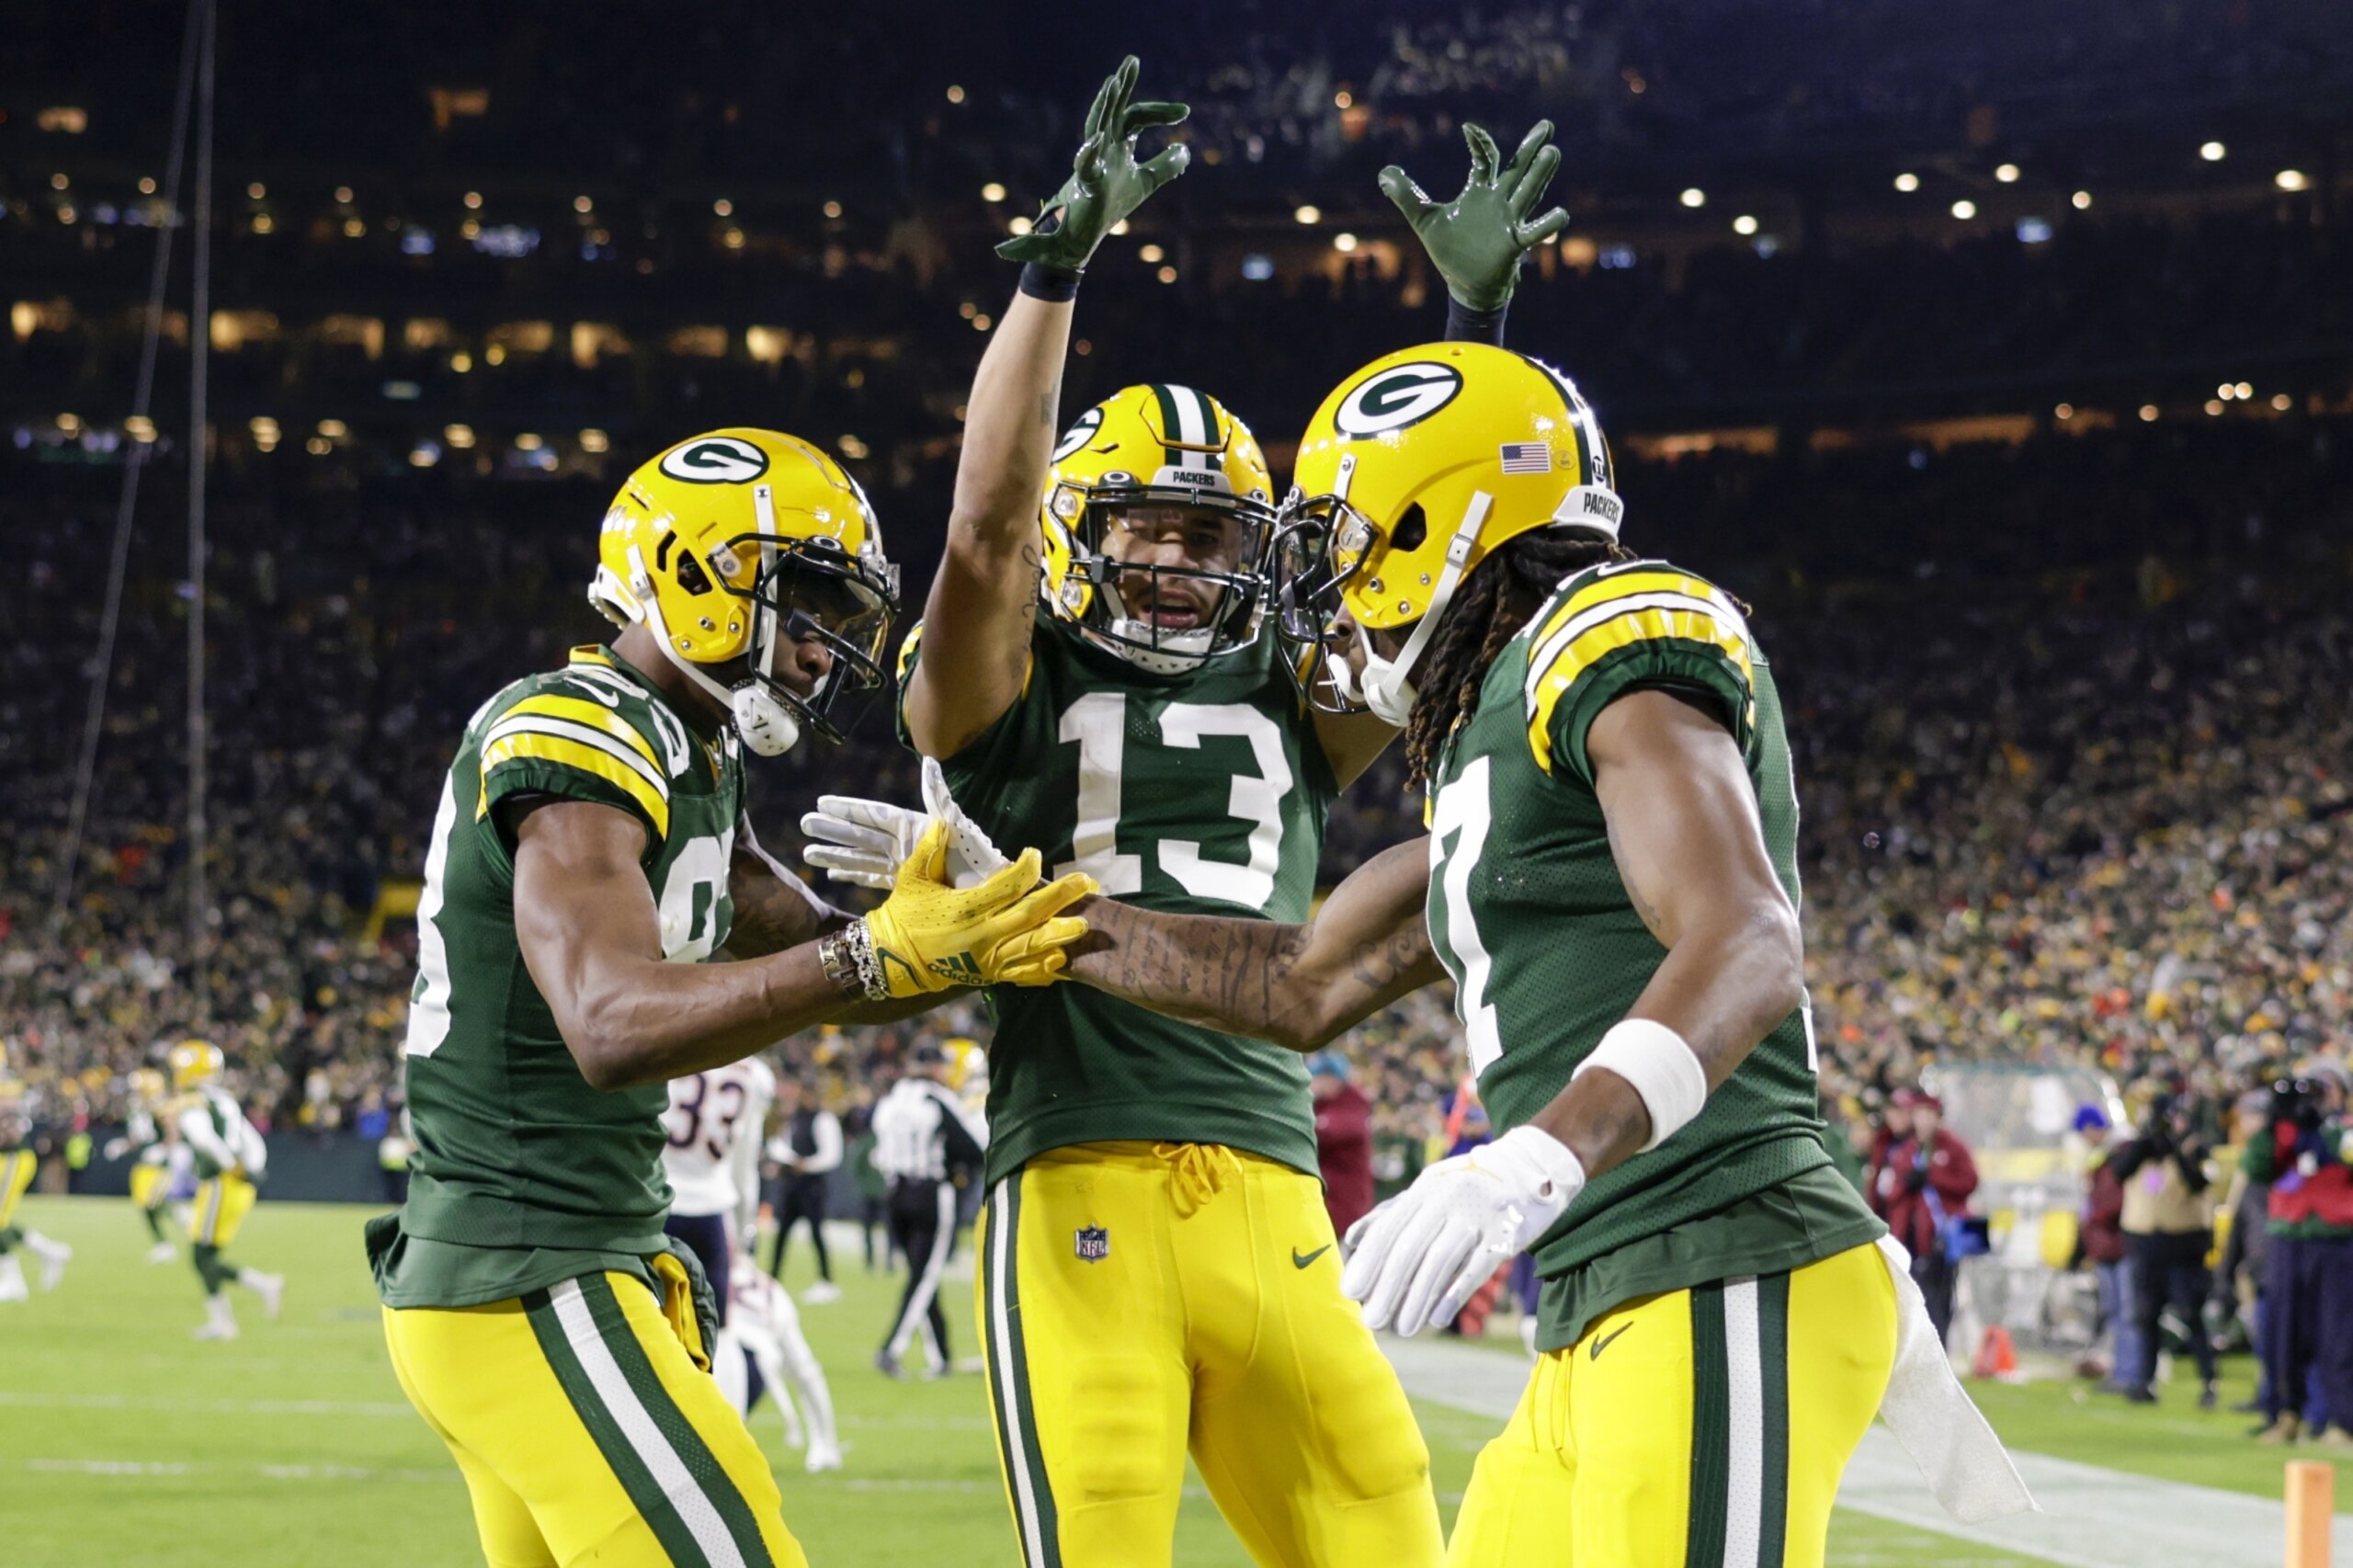 Rodgers Throws 4 Td Passes Packers Defeat Bears 45 30 Wtop News